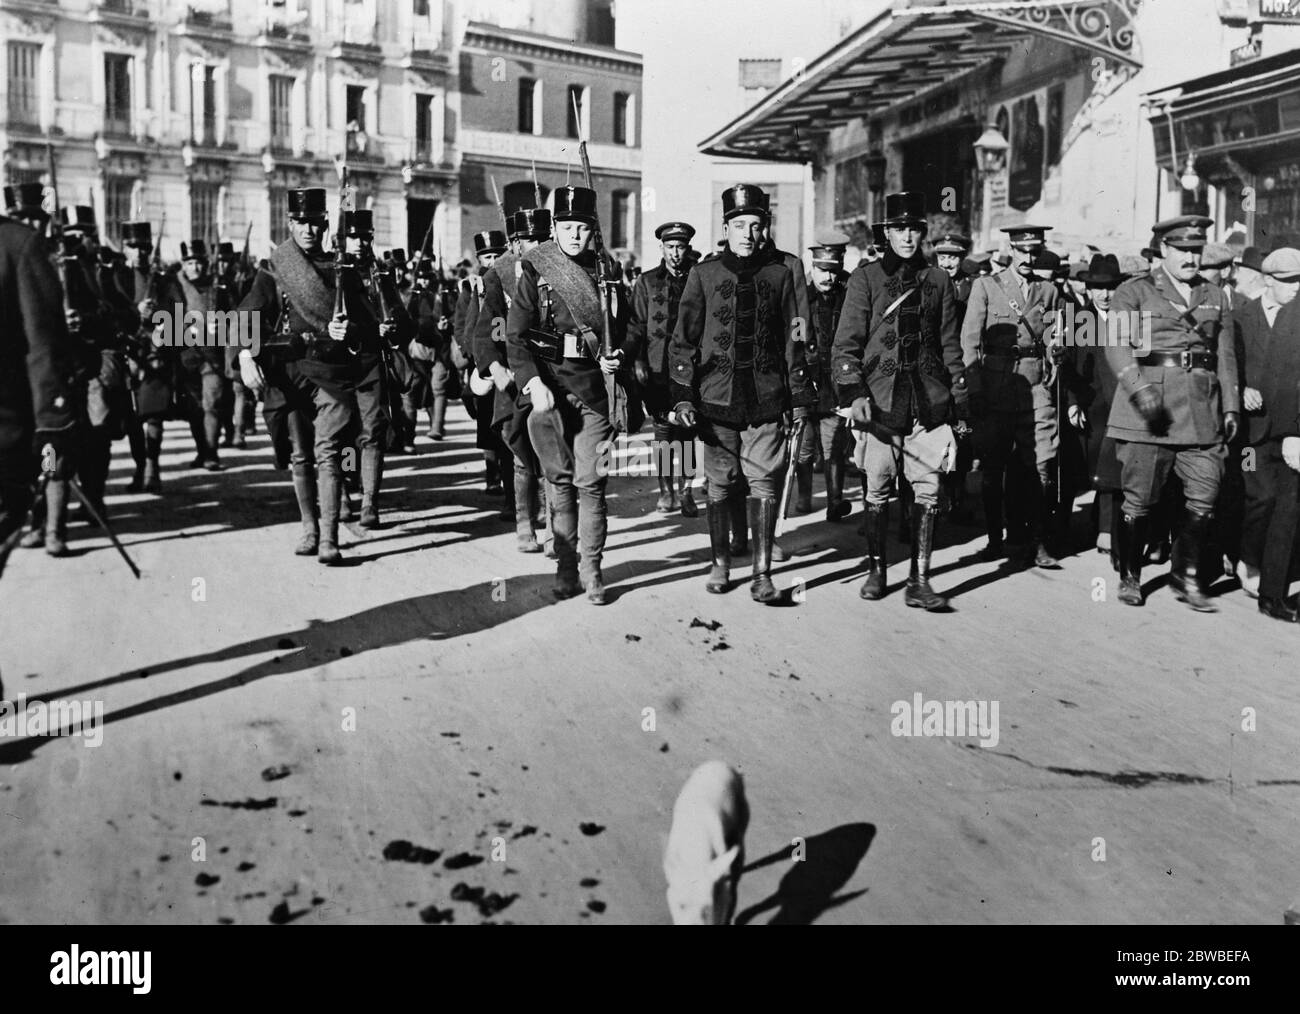 Spanish Crown Prince With Fixed Bayonet The Spanish Crown Prince ( second from left front row ) passing through the streets of Madrid 21 November 1922 Stock Photo